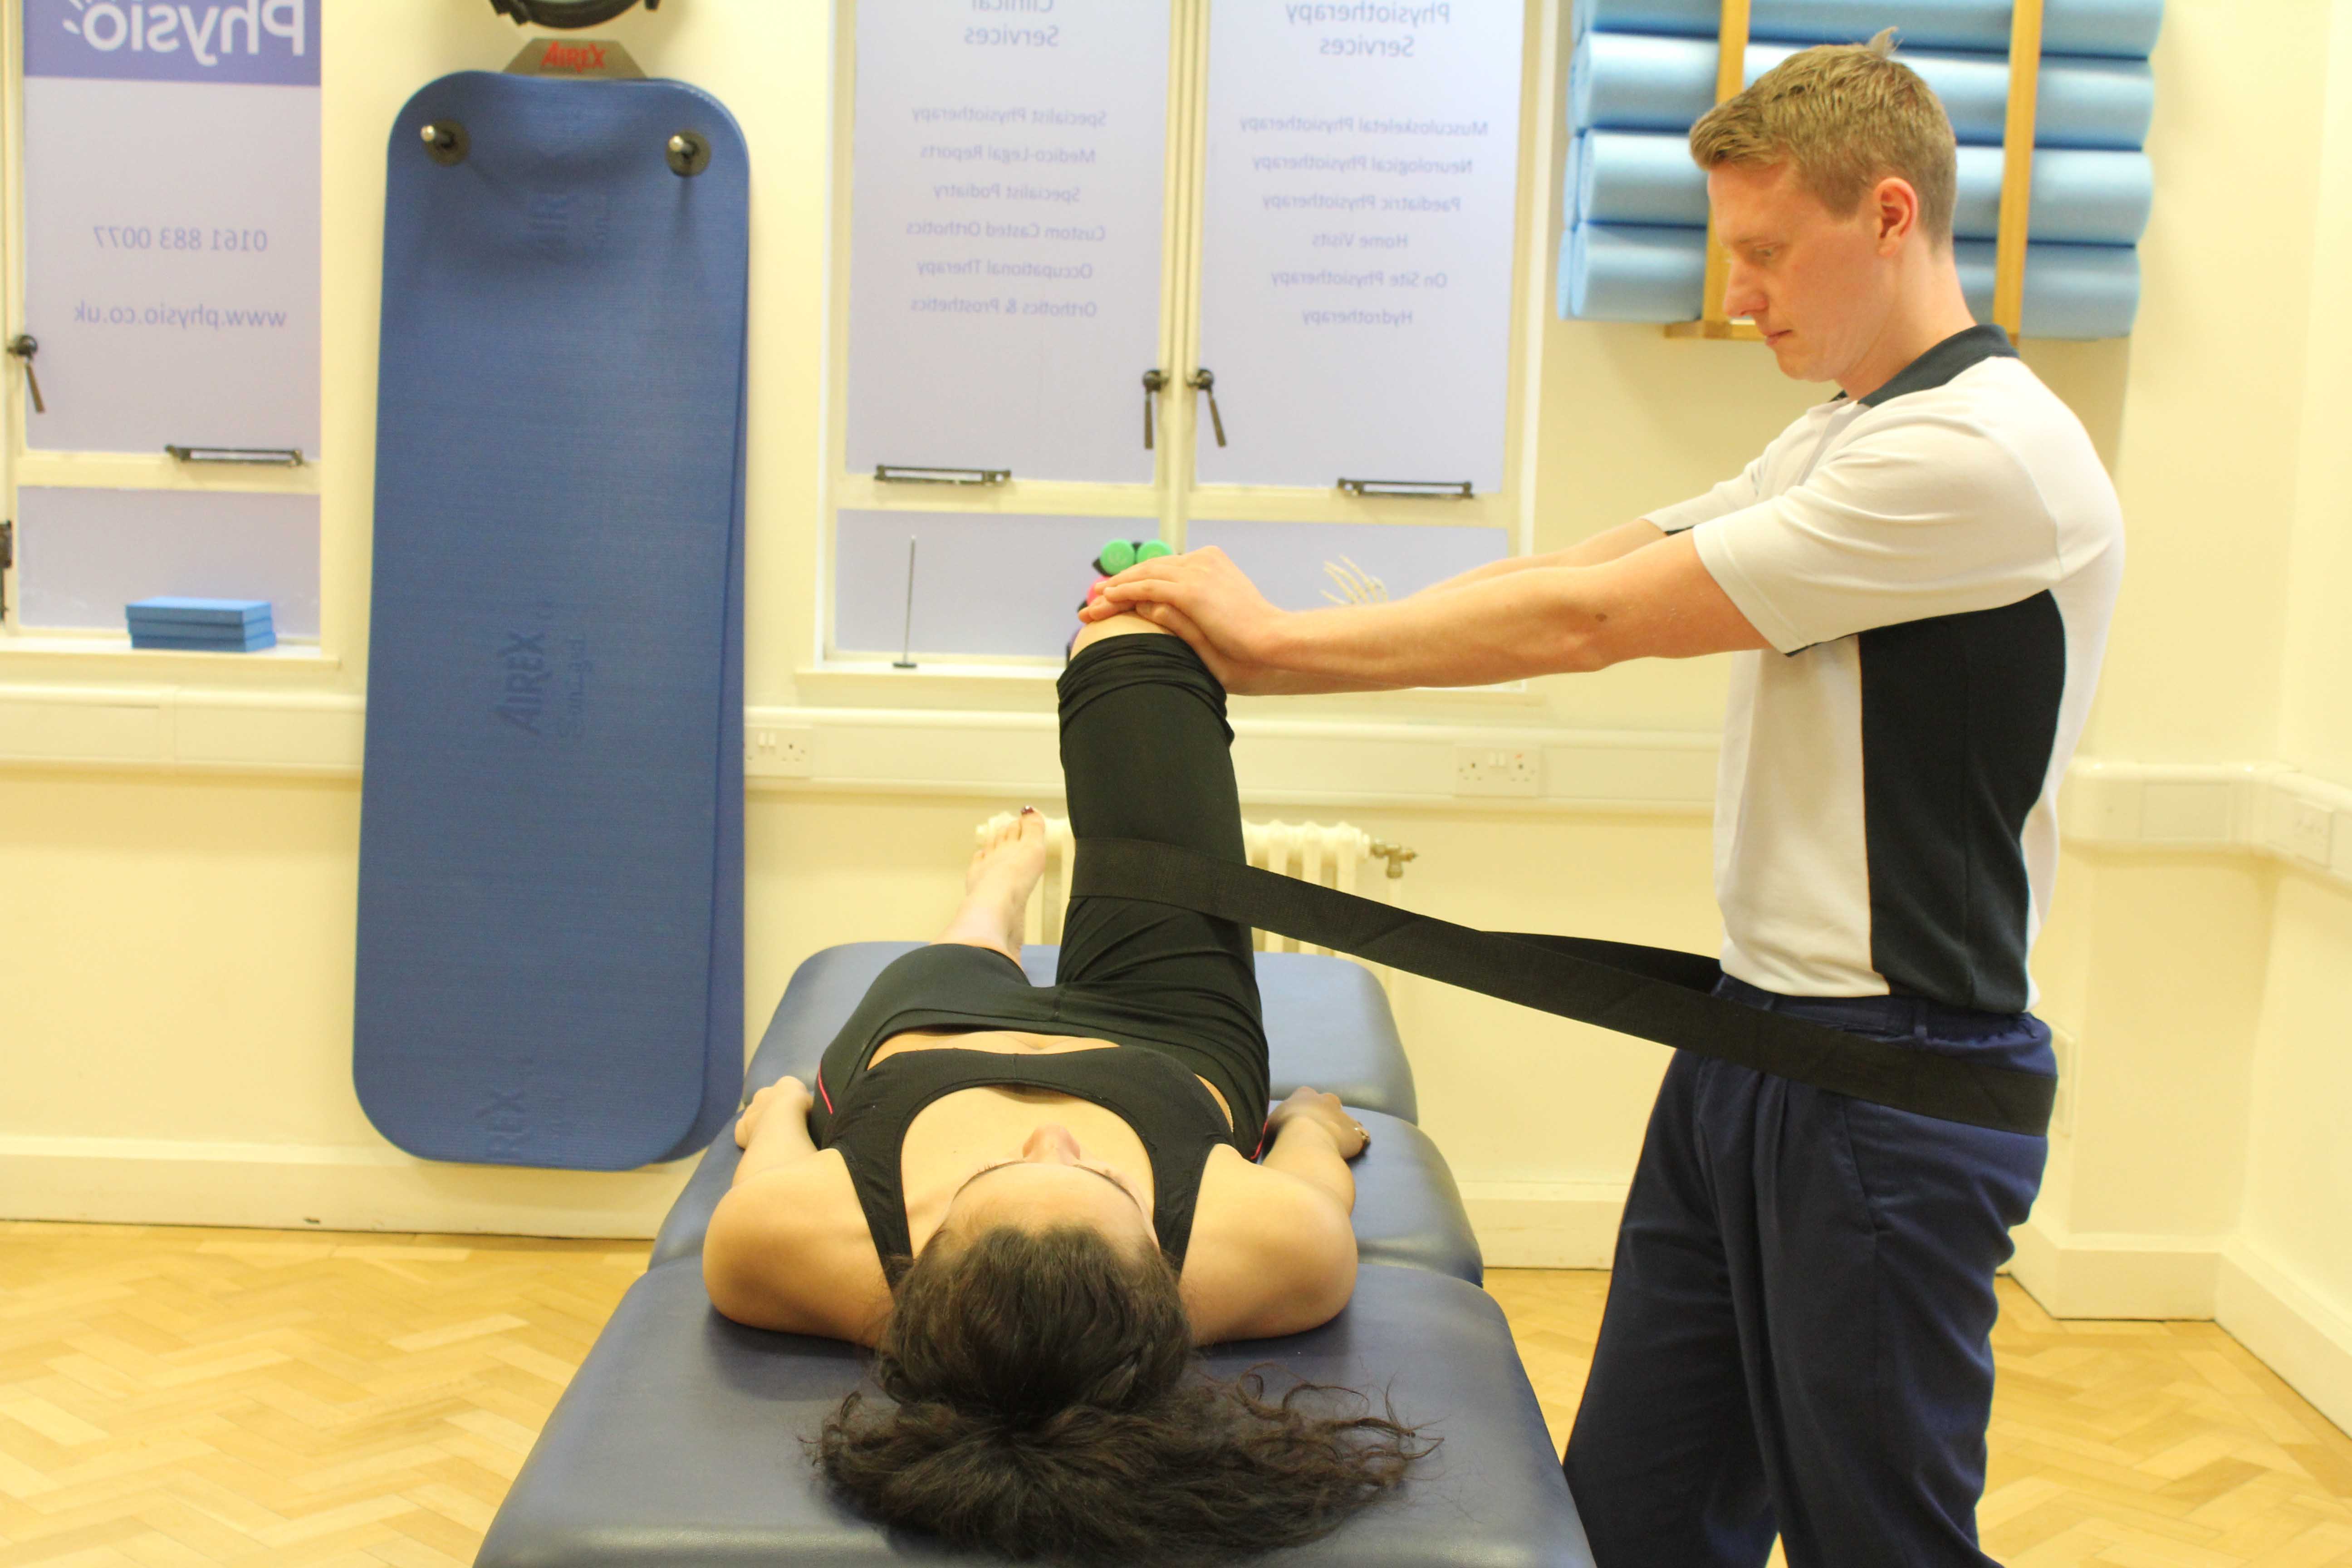 Mobilisation and joint distraction techniques to relieve pain and stiffness in the hip joint